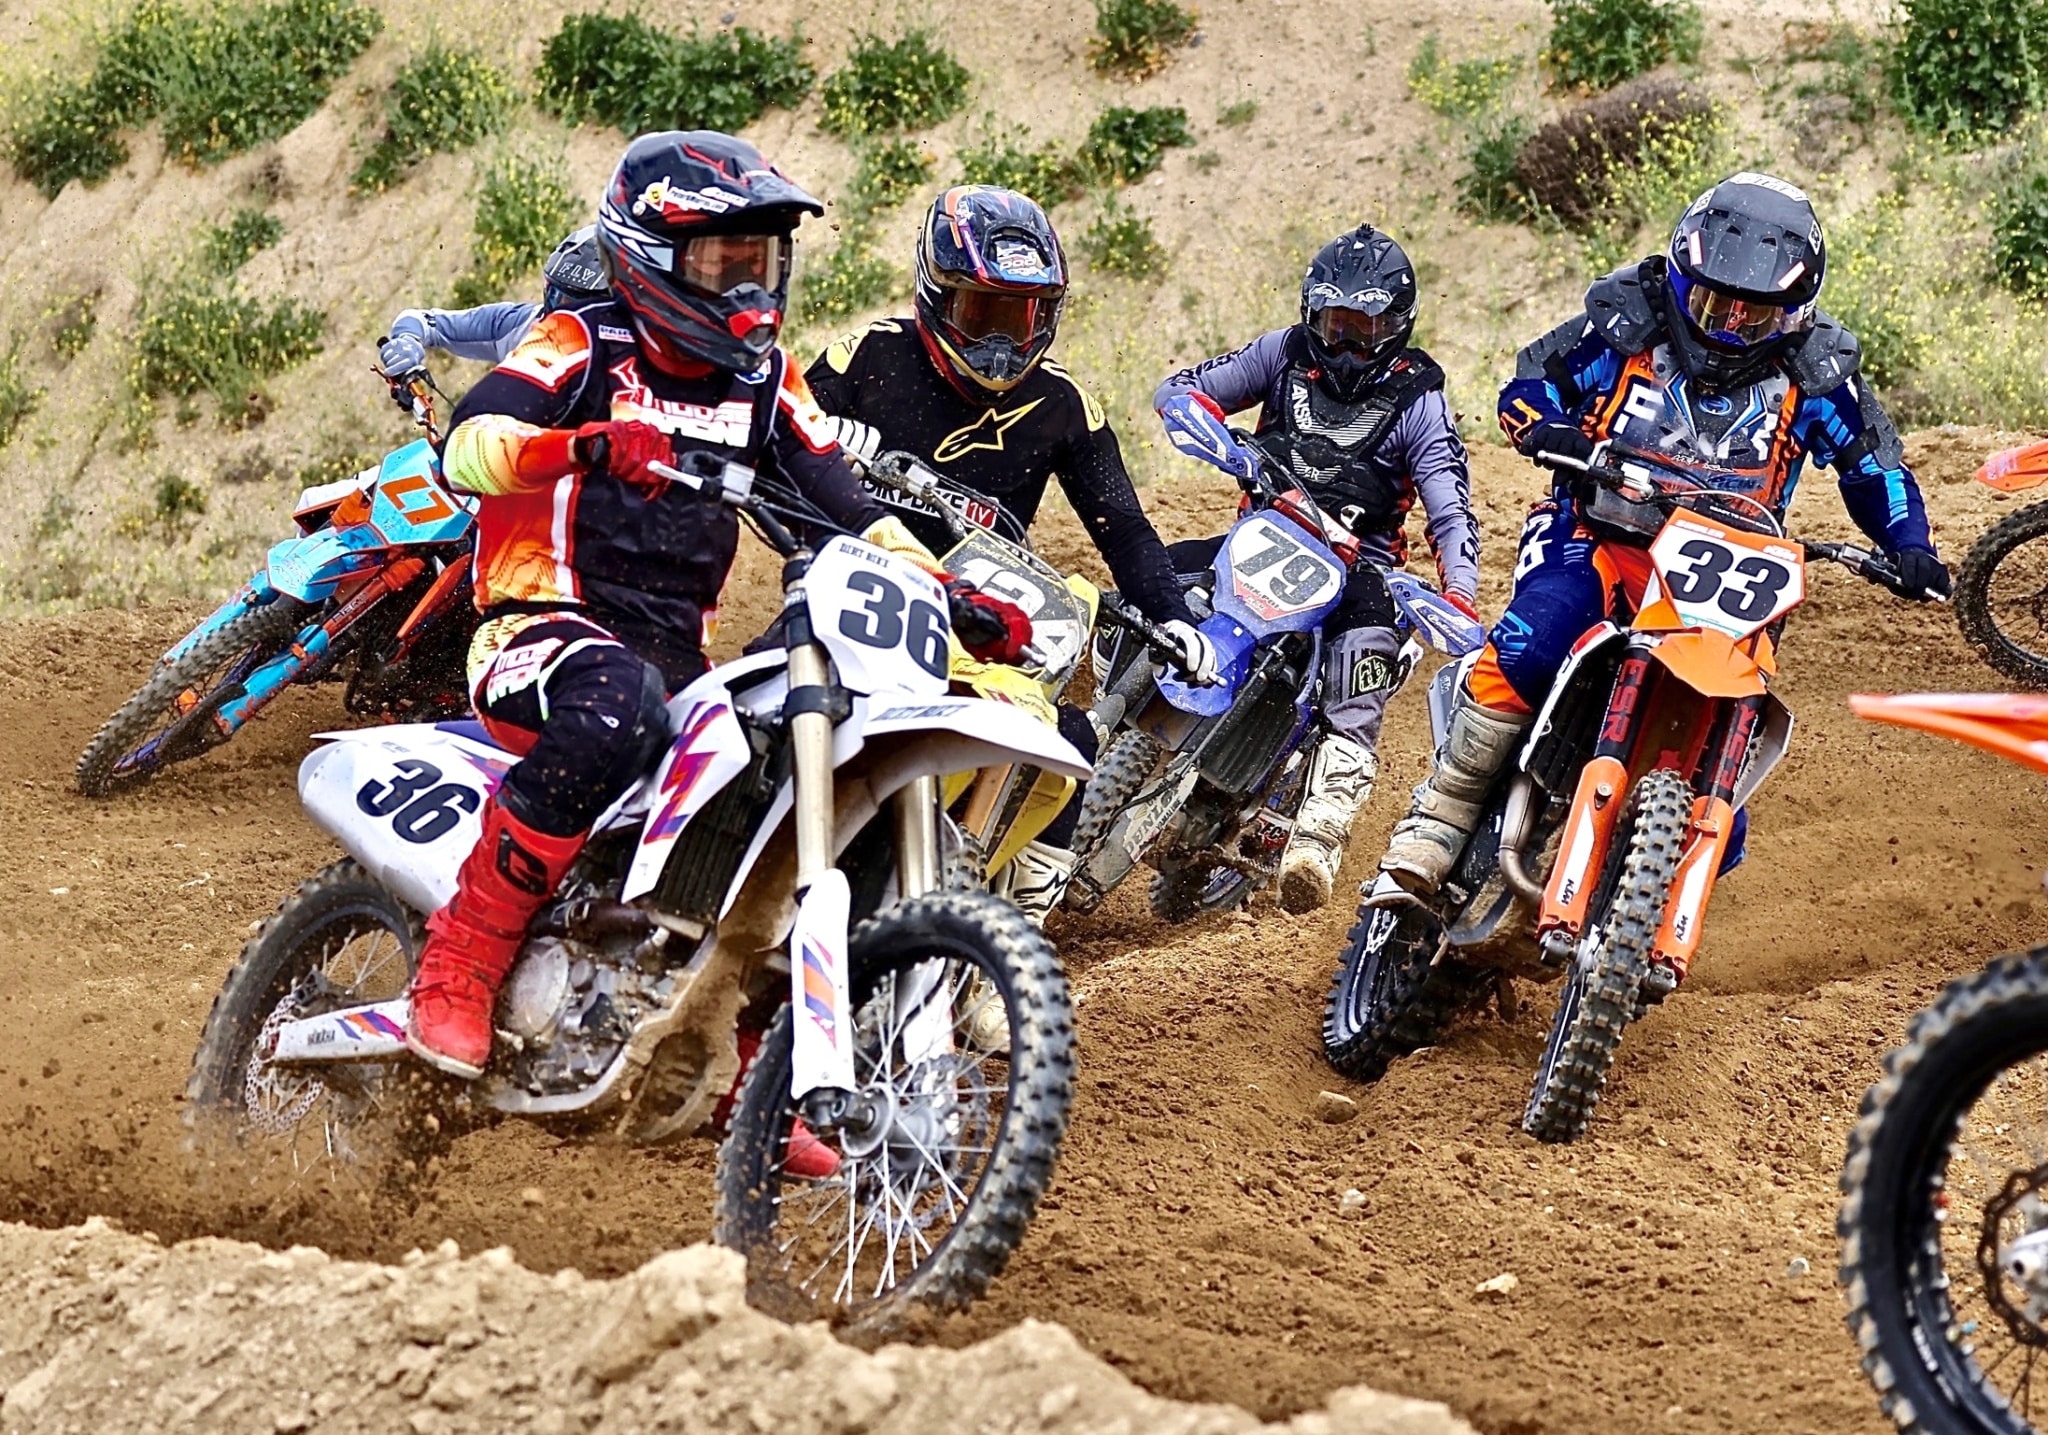 <div>“SATURDAY AT THE GLEN” MOTOCROSS RACE REPORT: TWO STROKES, DOUBLE CLASSING IT & RACING THE RAIN (NOT IN THE RAIN)</div>